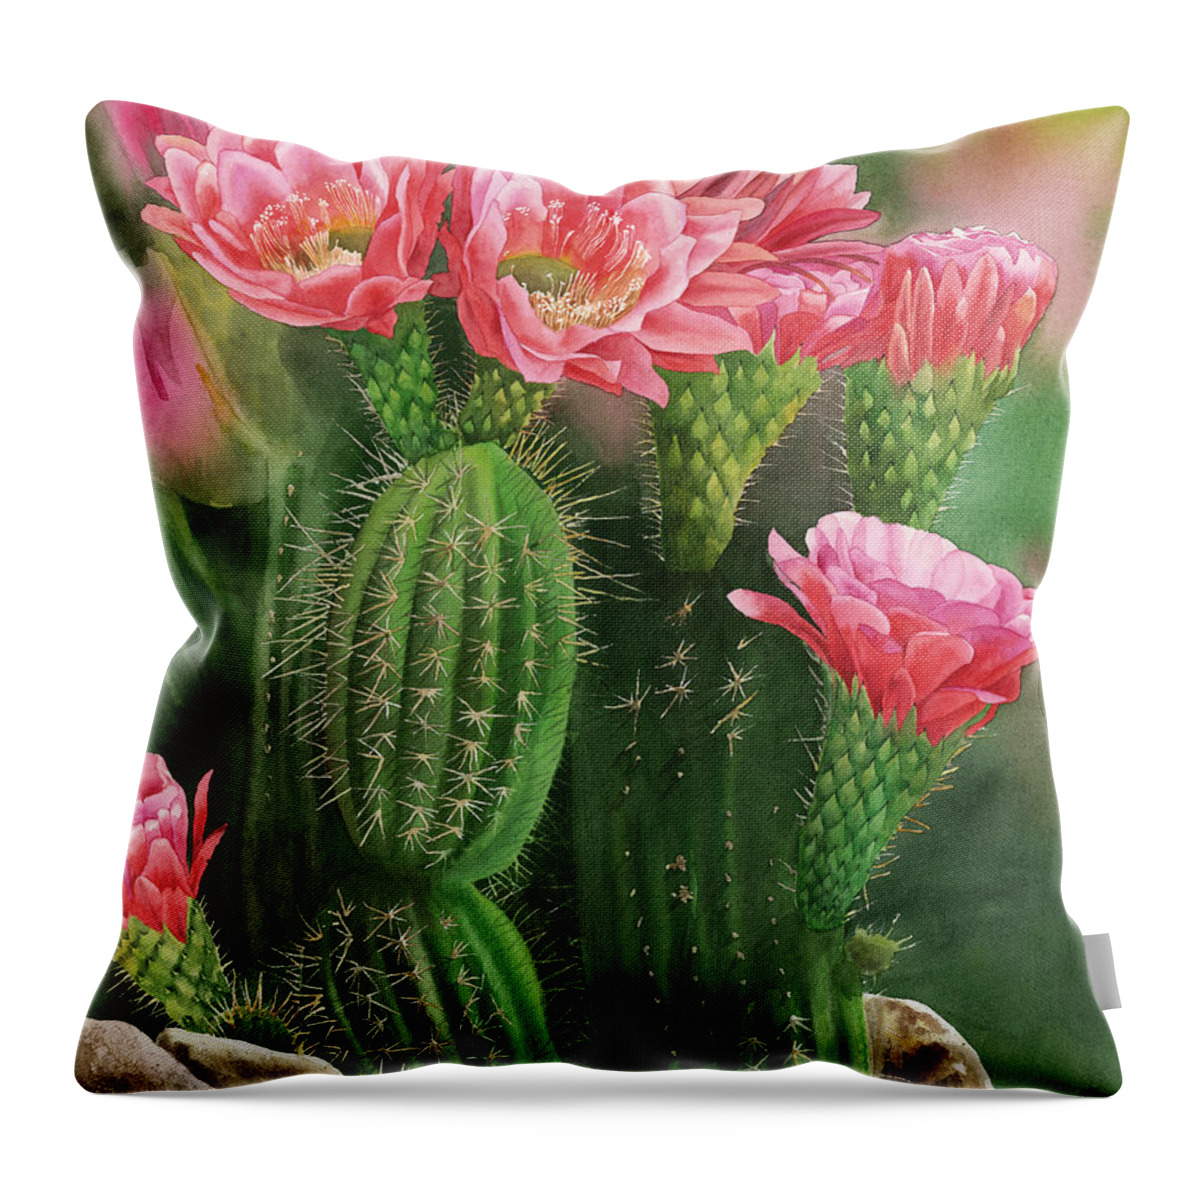 Flower Throw Pillow featuring the painting Spiky Beauty by Espero Art